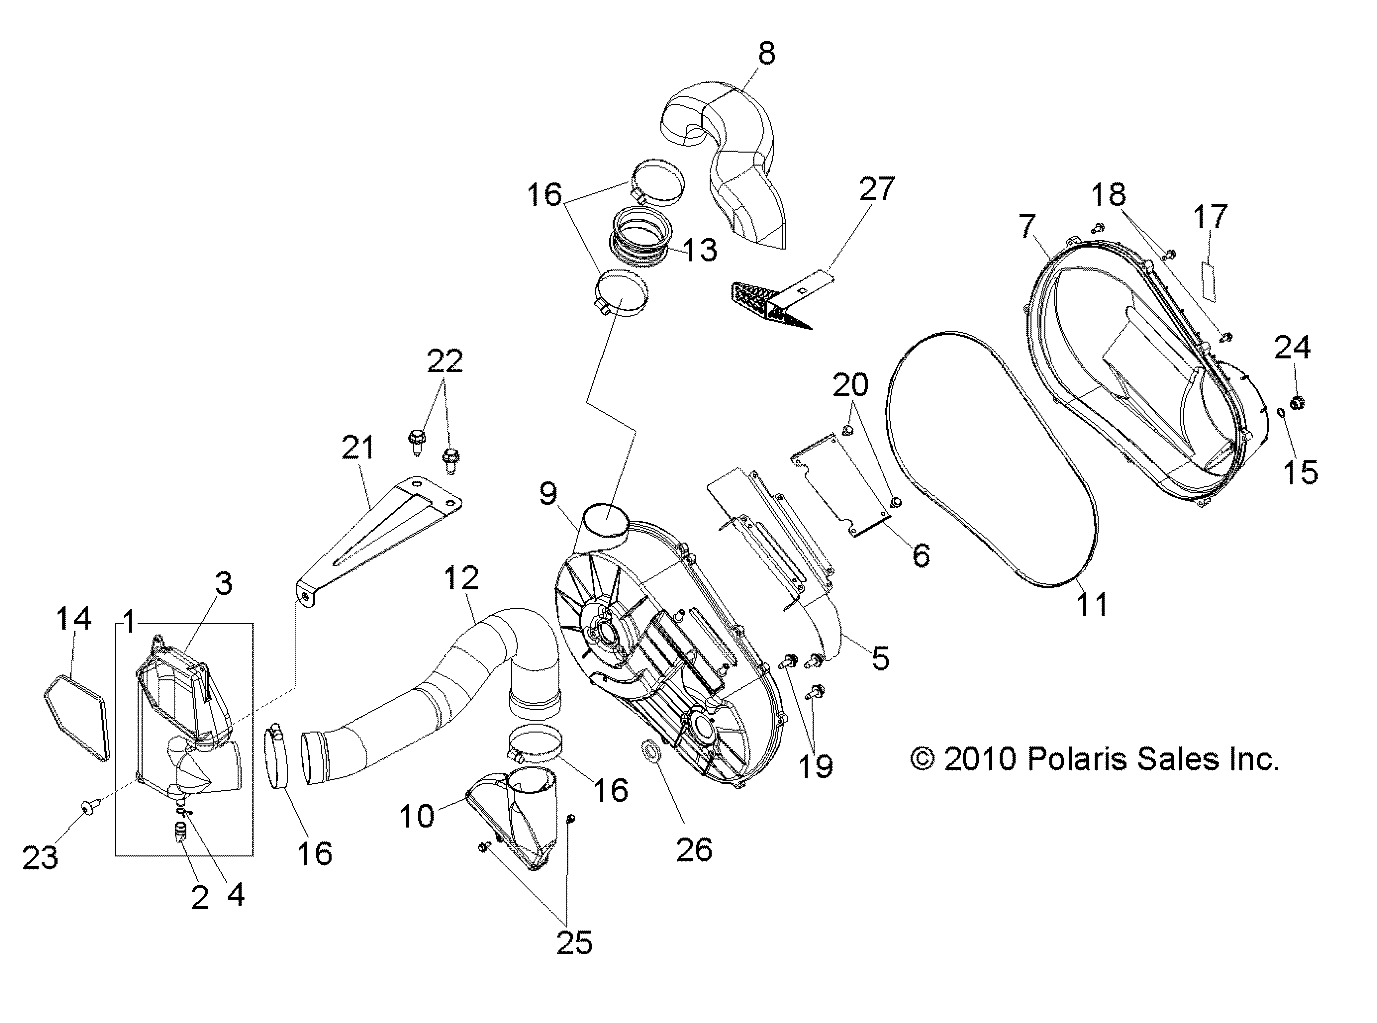 Part Number : 1240635 INTAKE ASSEMBLY  CLUTCH